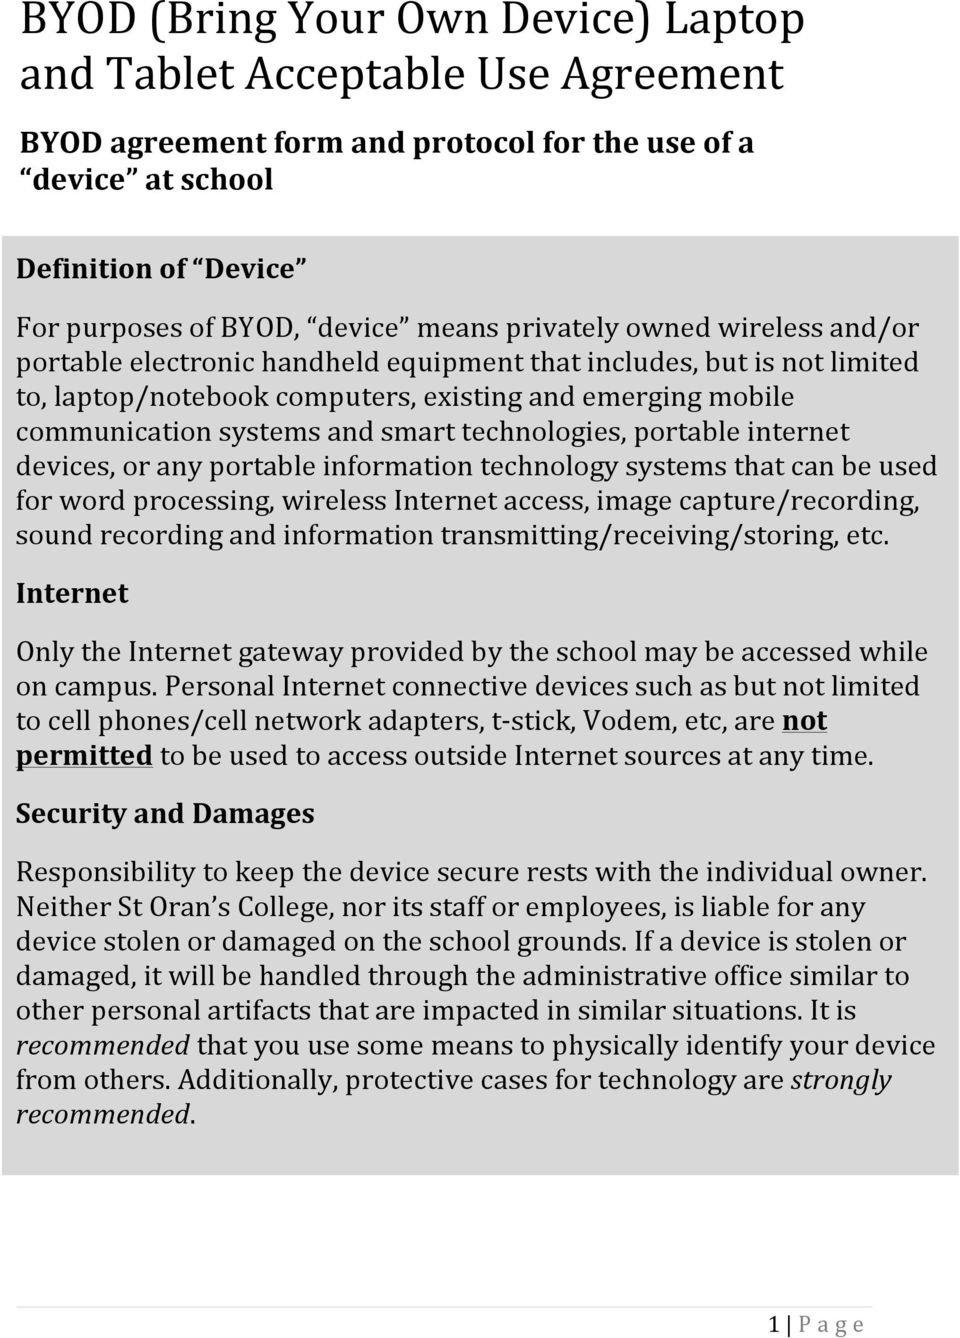 Byod Agreement Form Od Bring Your Own Device Laptop And Tablet Acceptable Use